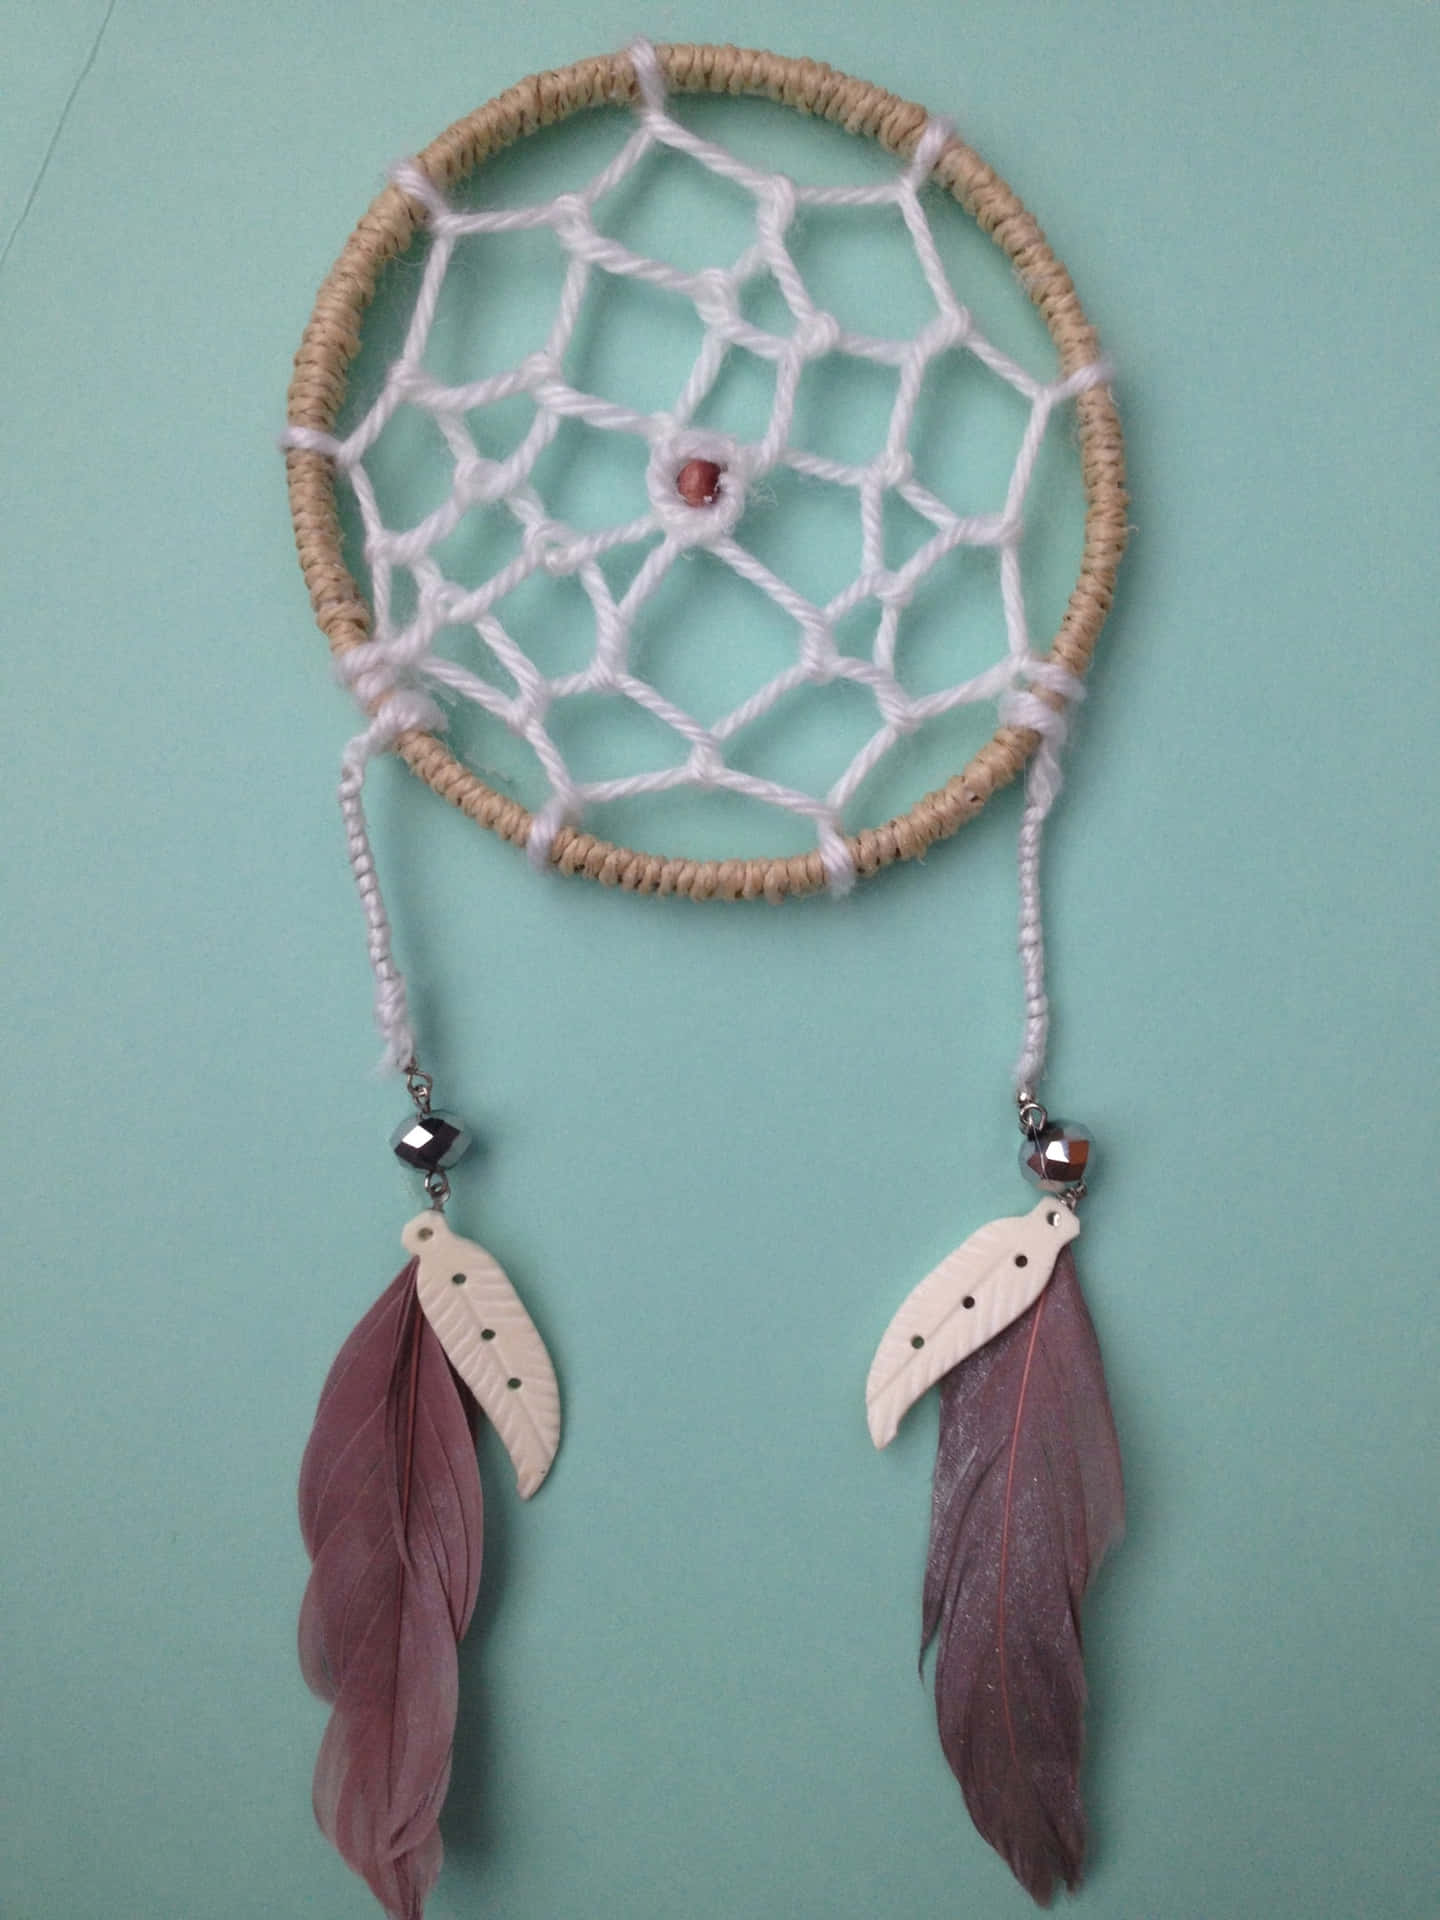 A Dream Catcher With Feathers Hanging On It